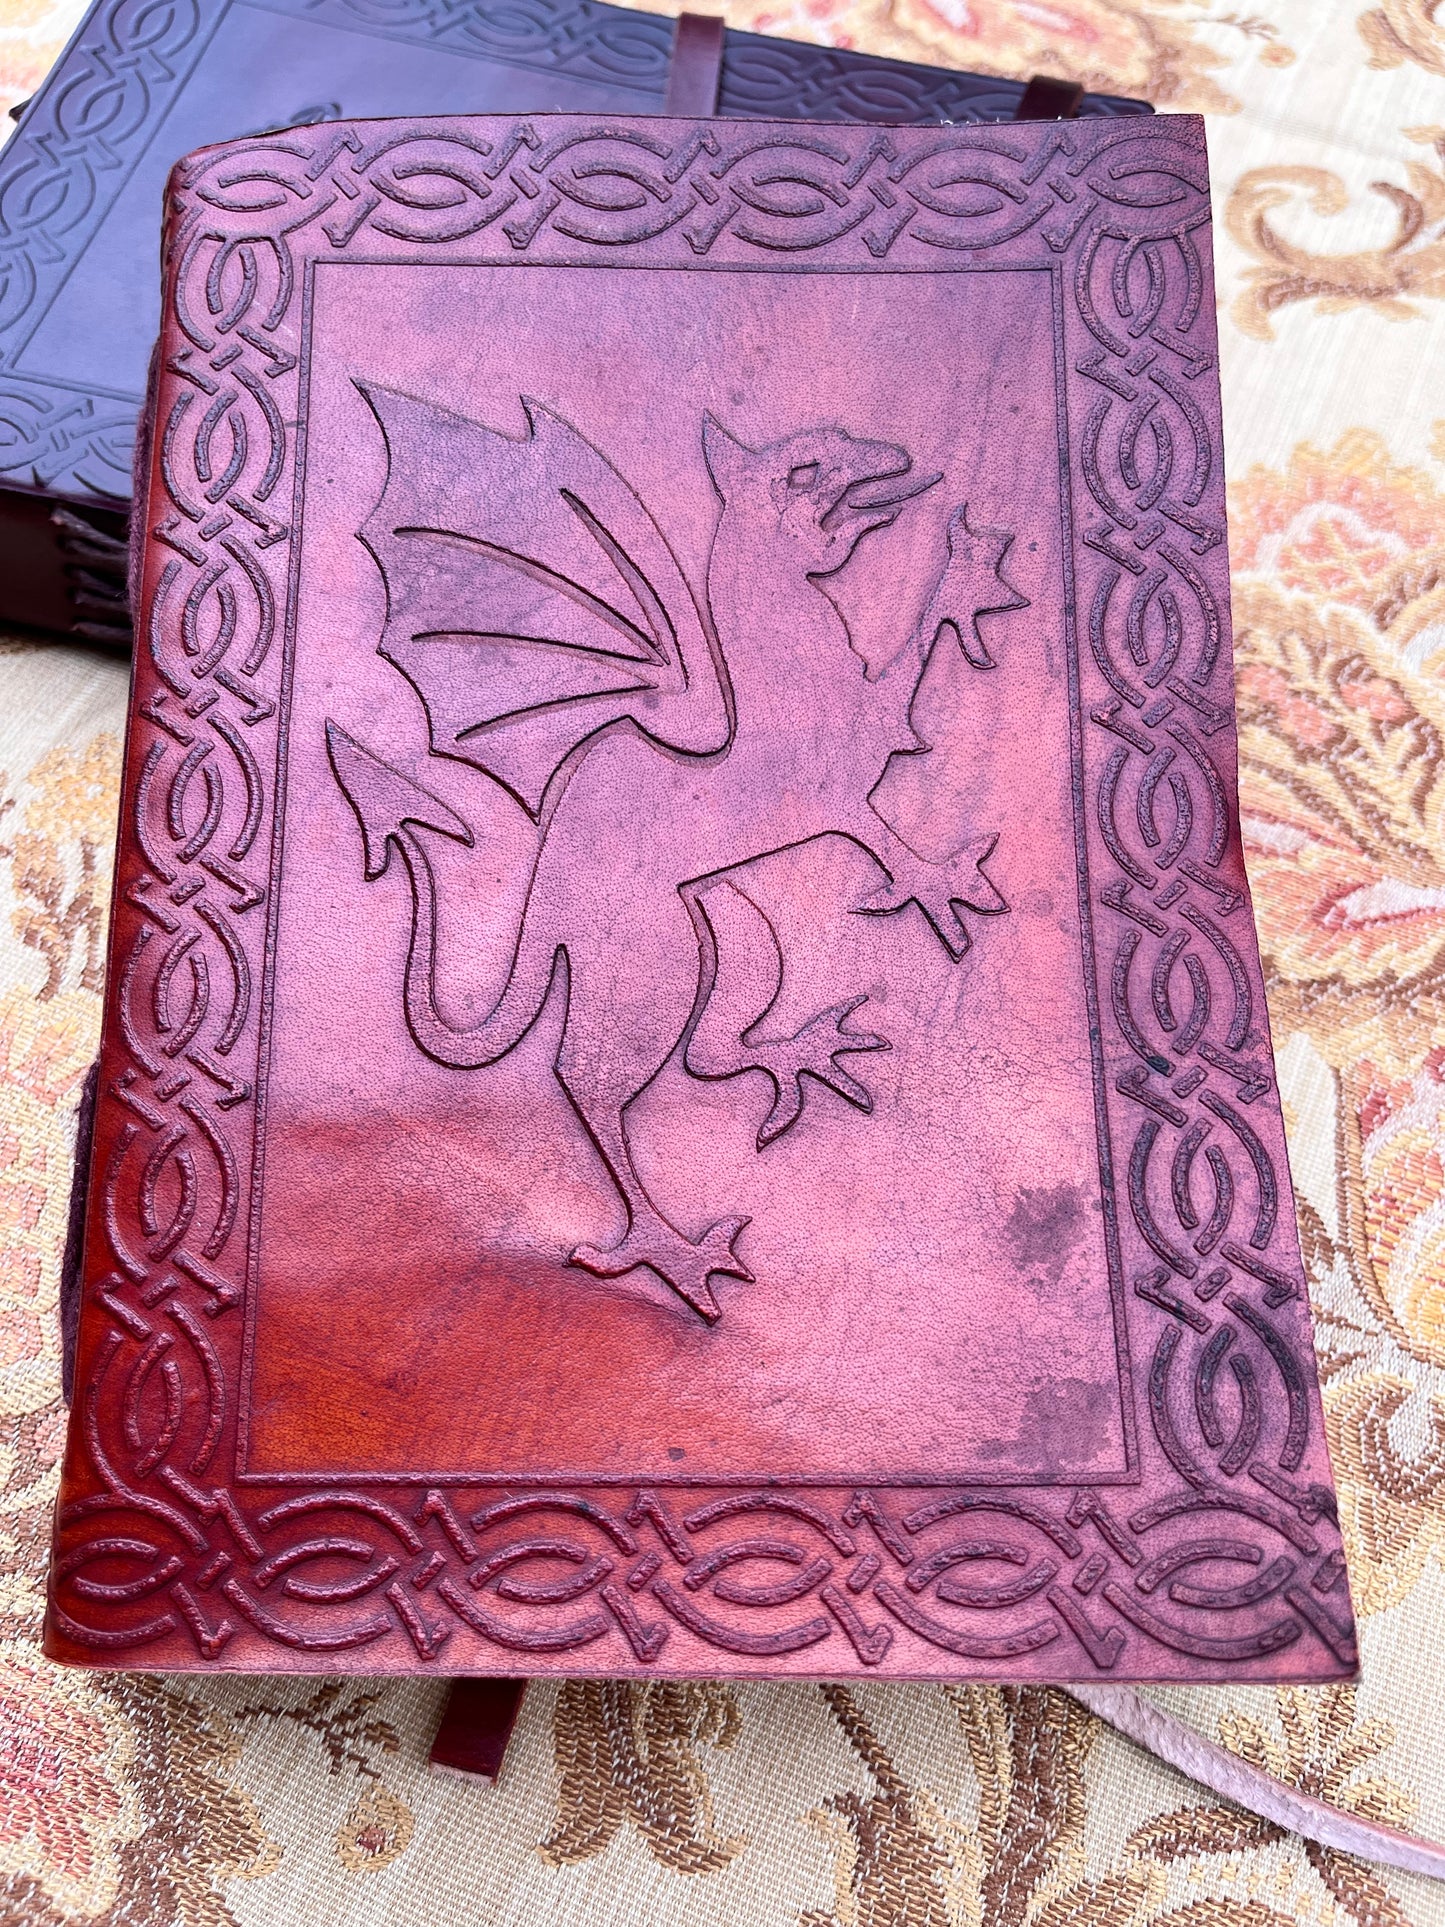 Rearing Gryphon Journal in Dark Red Leather